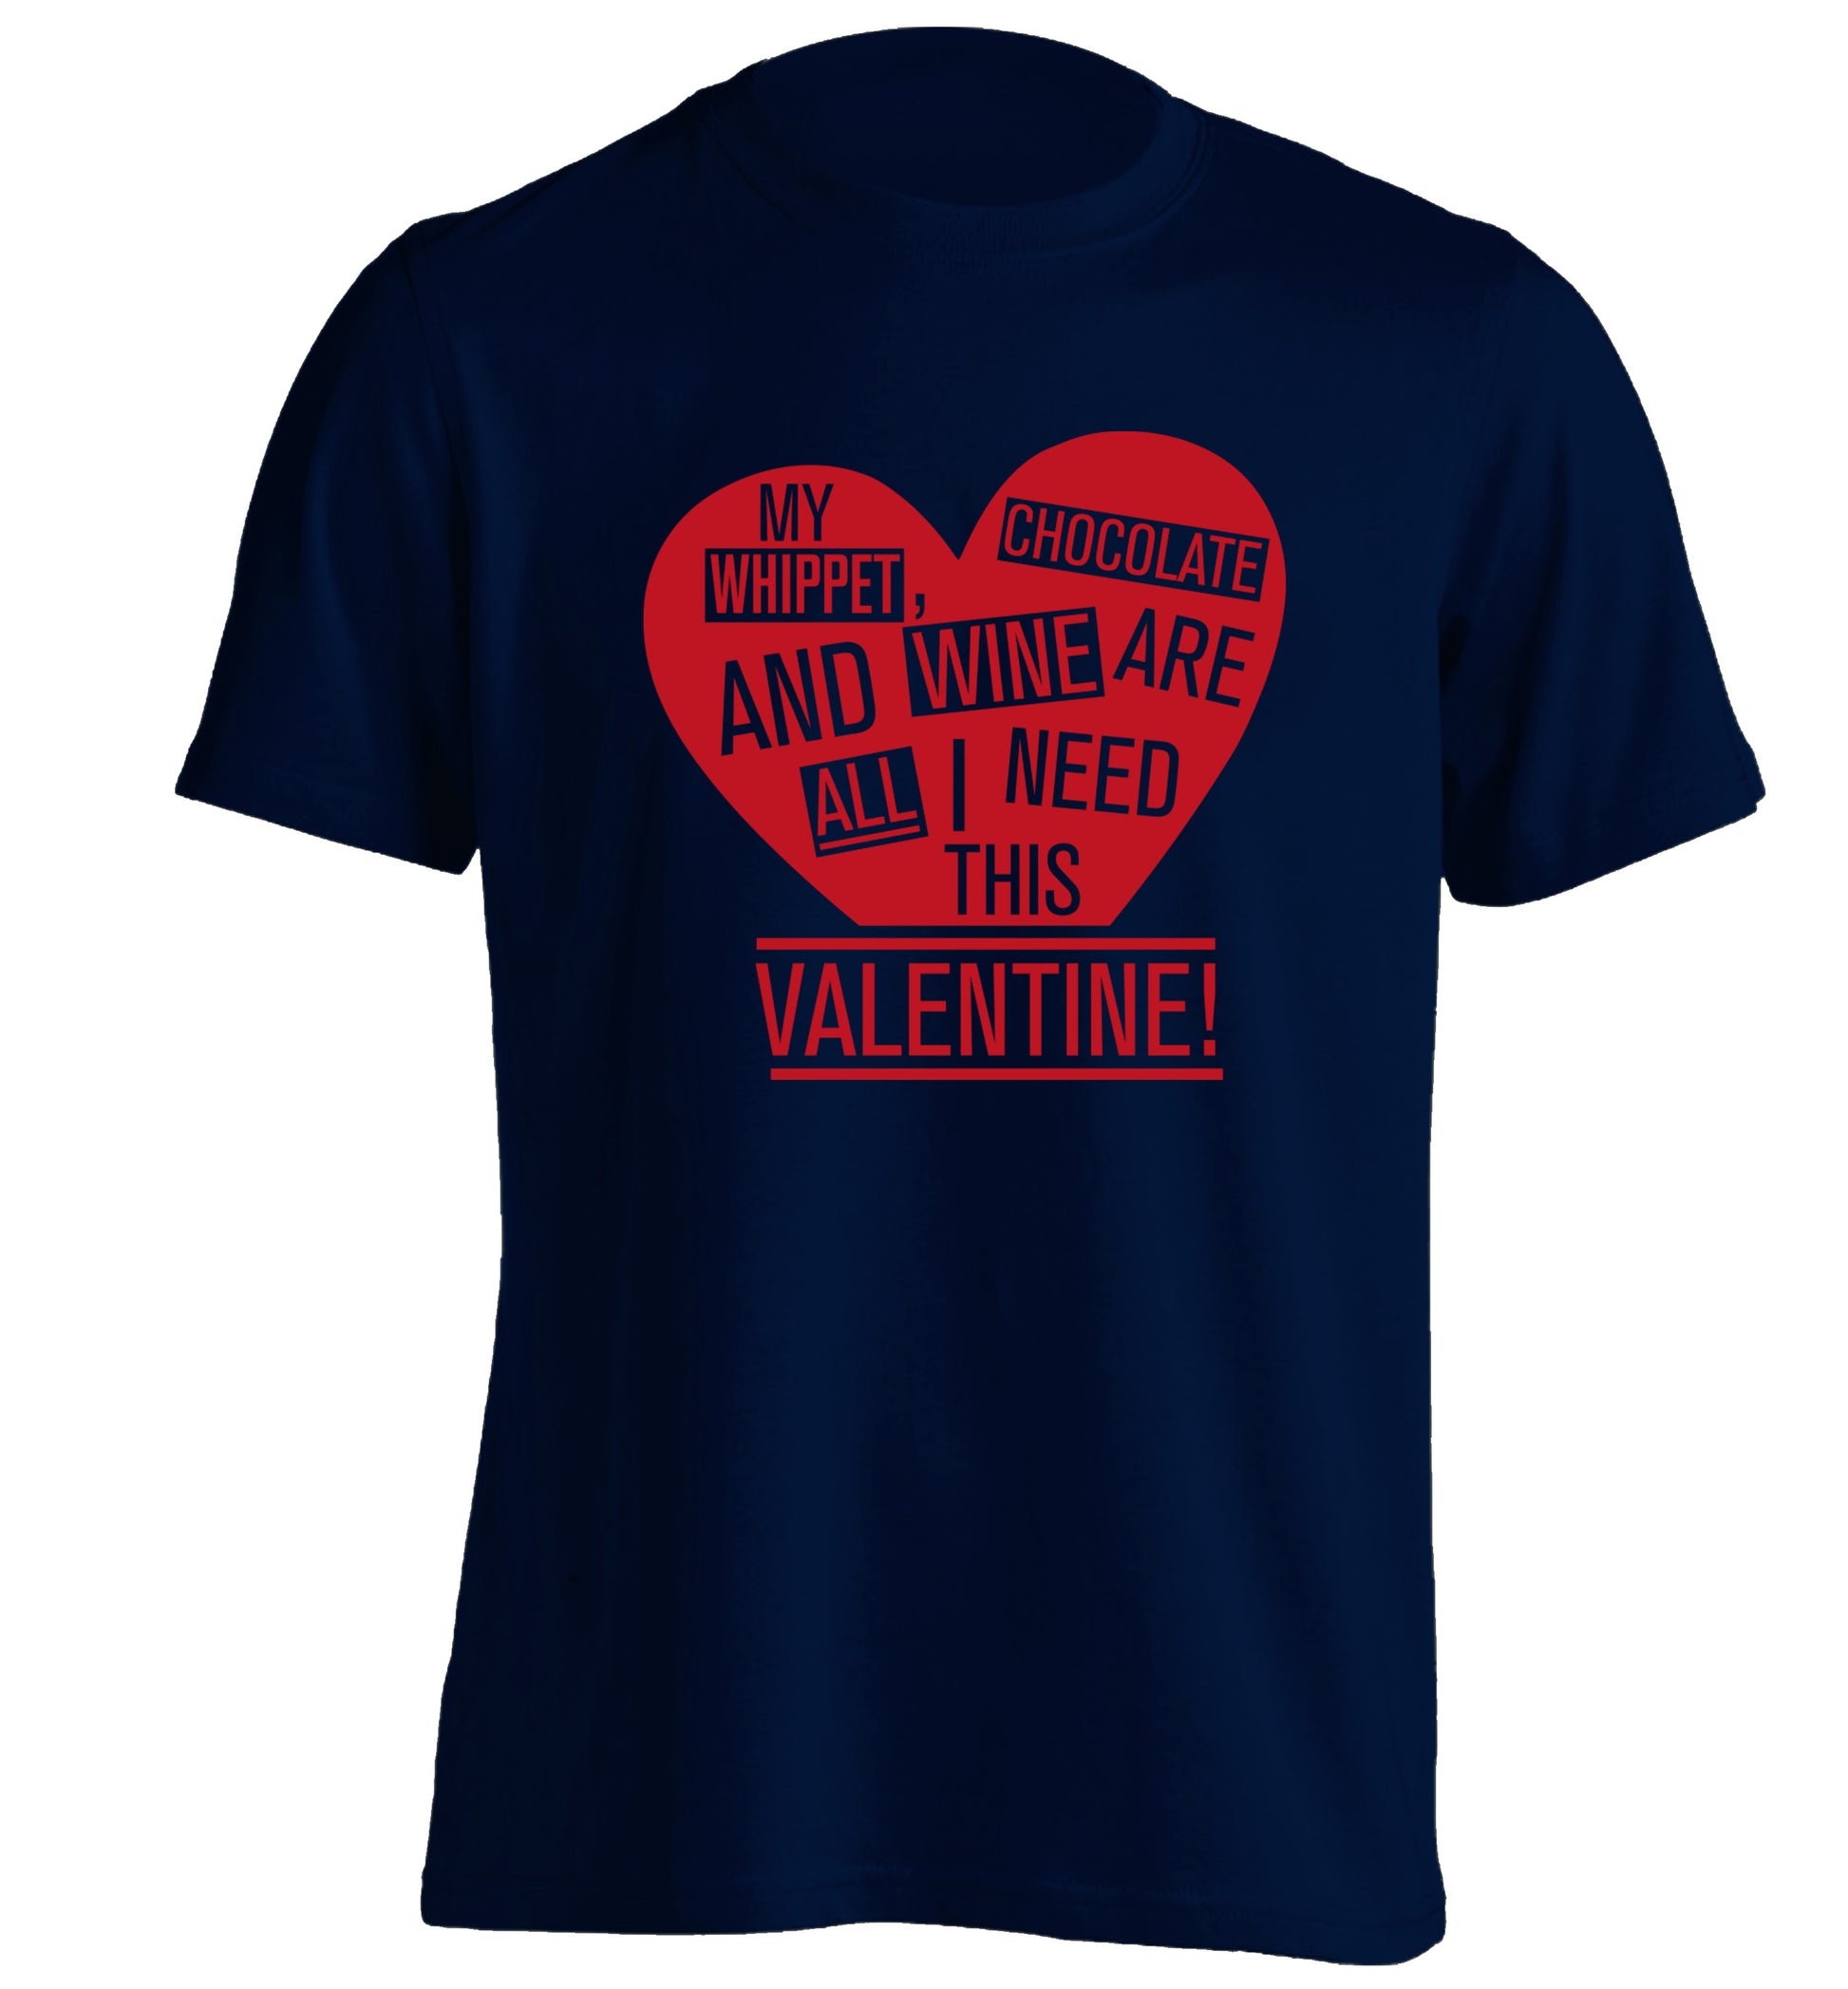 My whippet, chocolate and wine are all I need this valentine! adults unisex navy Tshirt 2XL